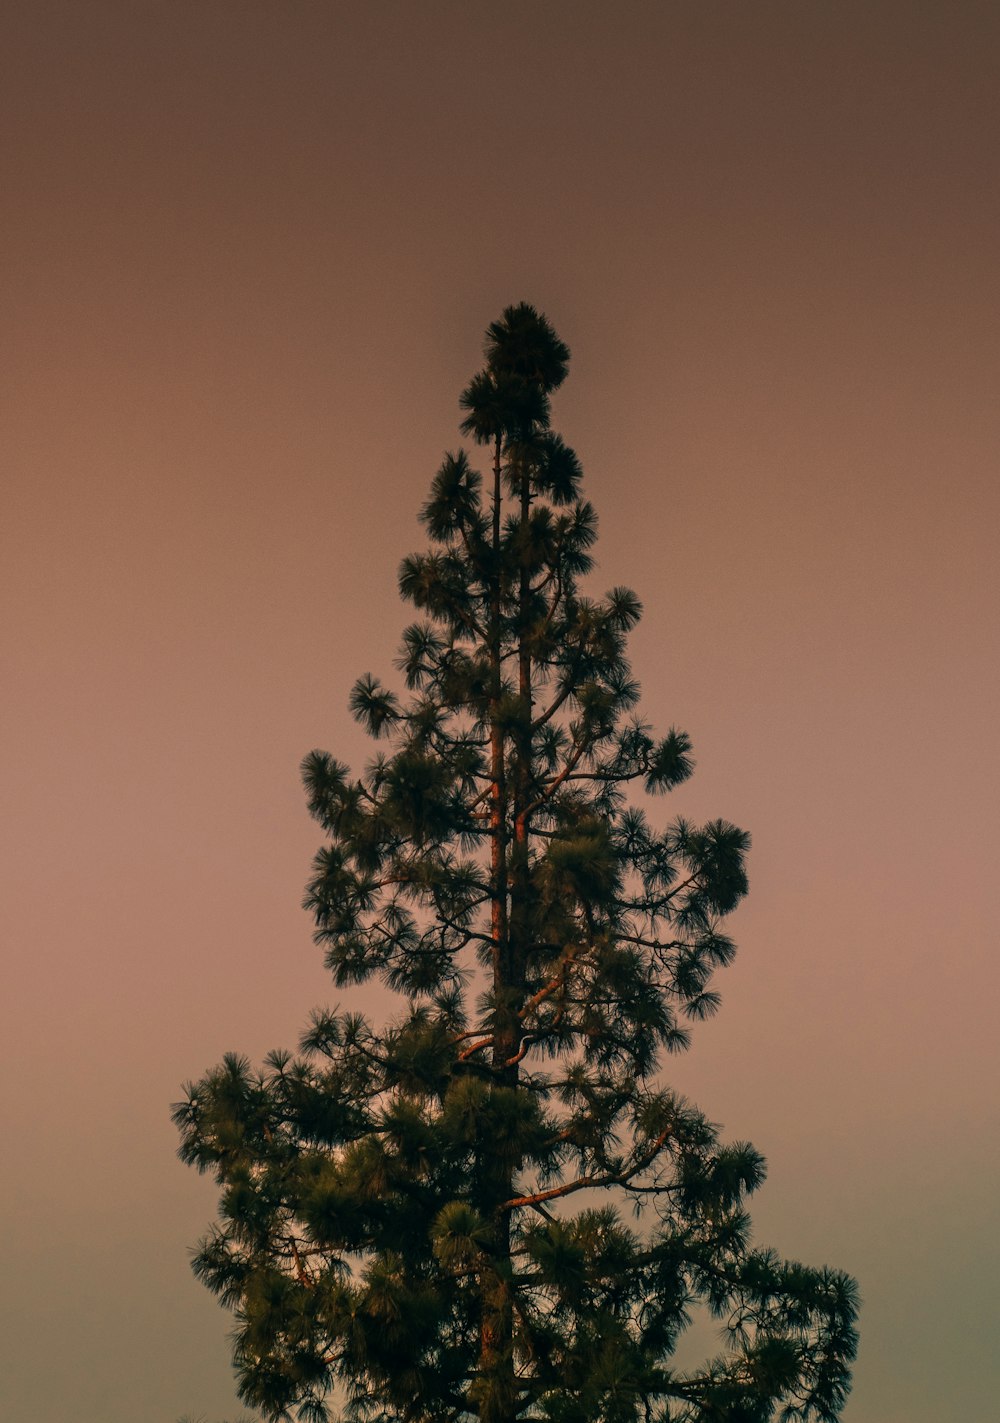 a lone pine tree in a field at dusk